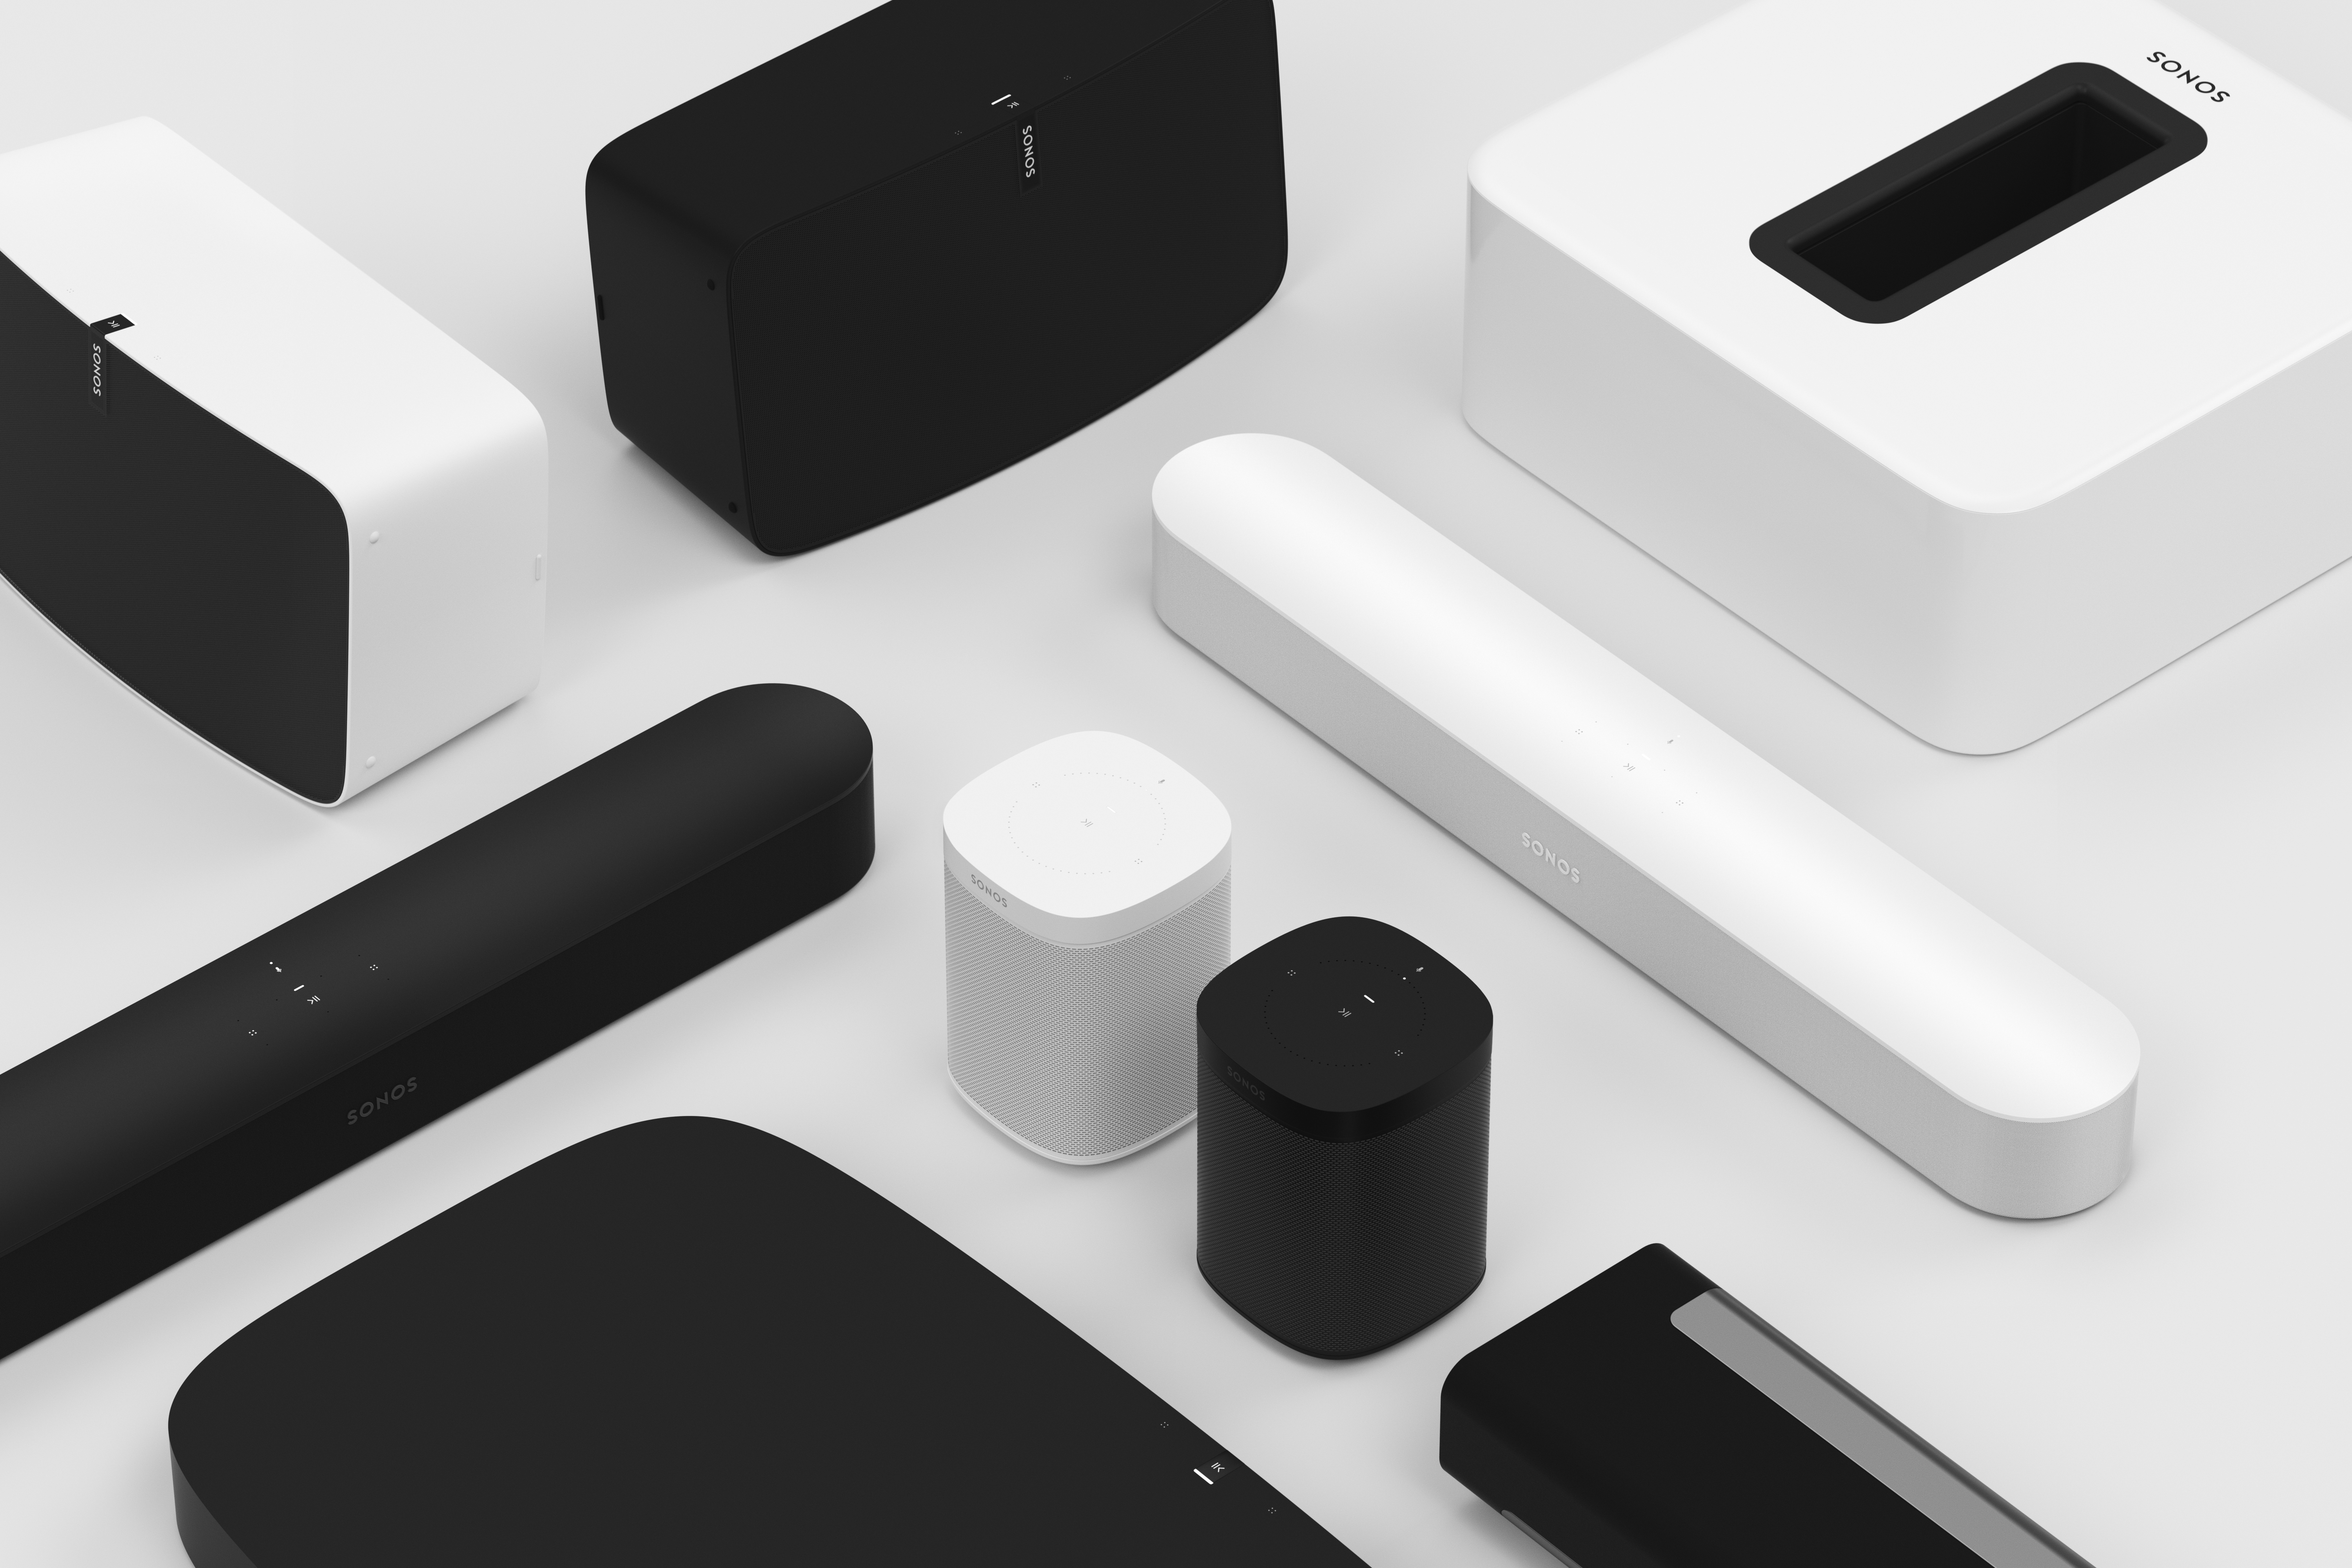 The Sonos debacle has raised questions about our personal tech’s life cycle